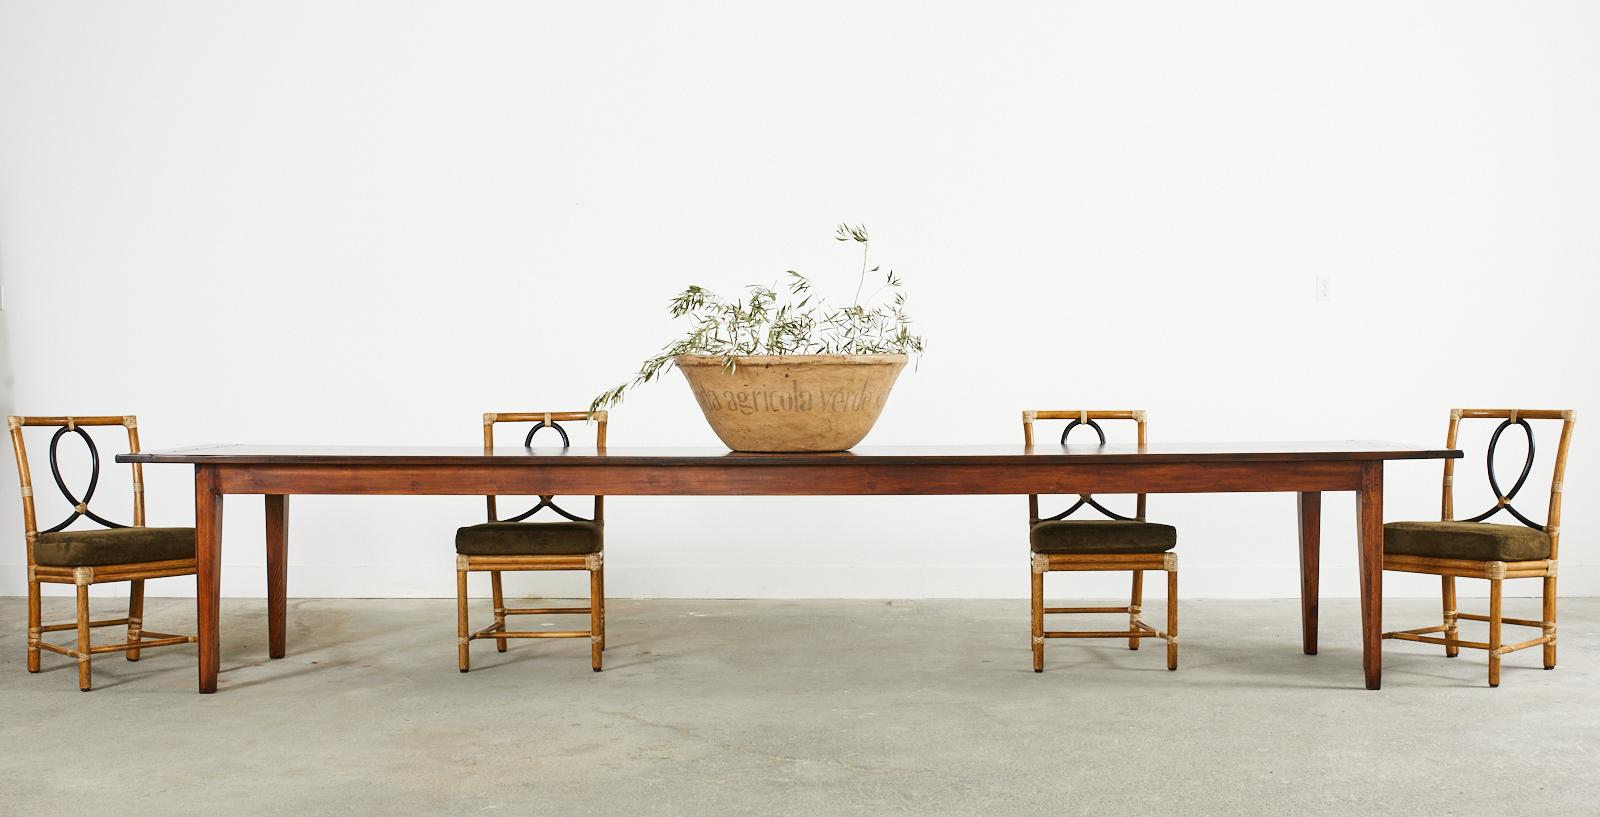 The quintessential French provincial farmhouse dining or harvest table made on a monumental scale measuring nearly 14 feet long. The table features a long, thick walnut plank top measuring 1 inch thick with breadboard ends and peg construction